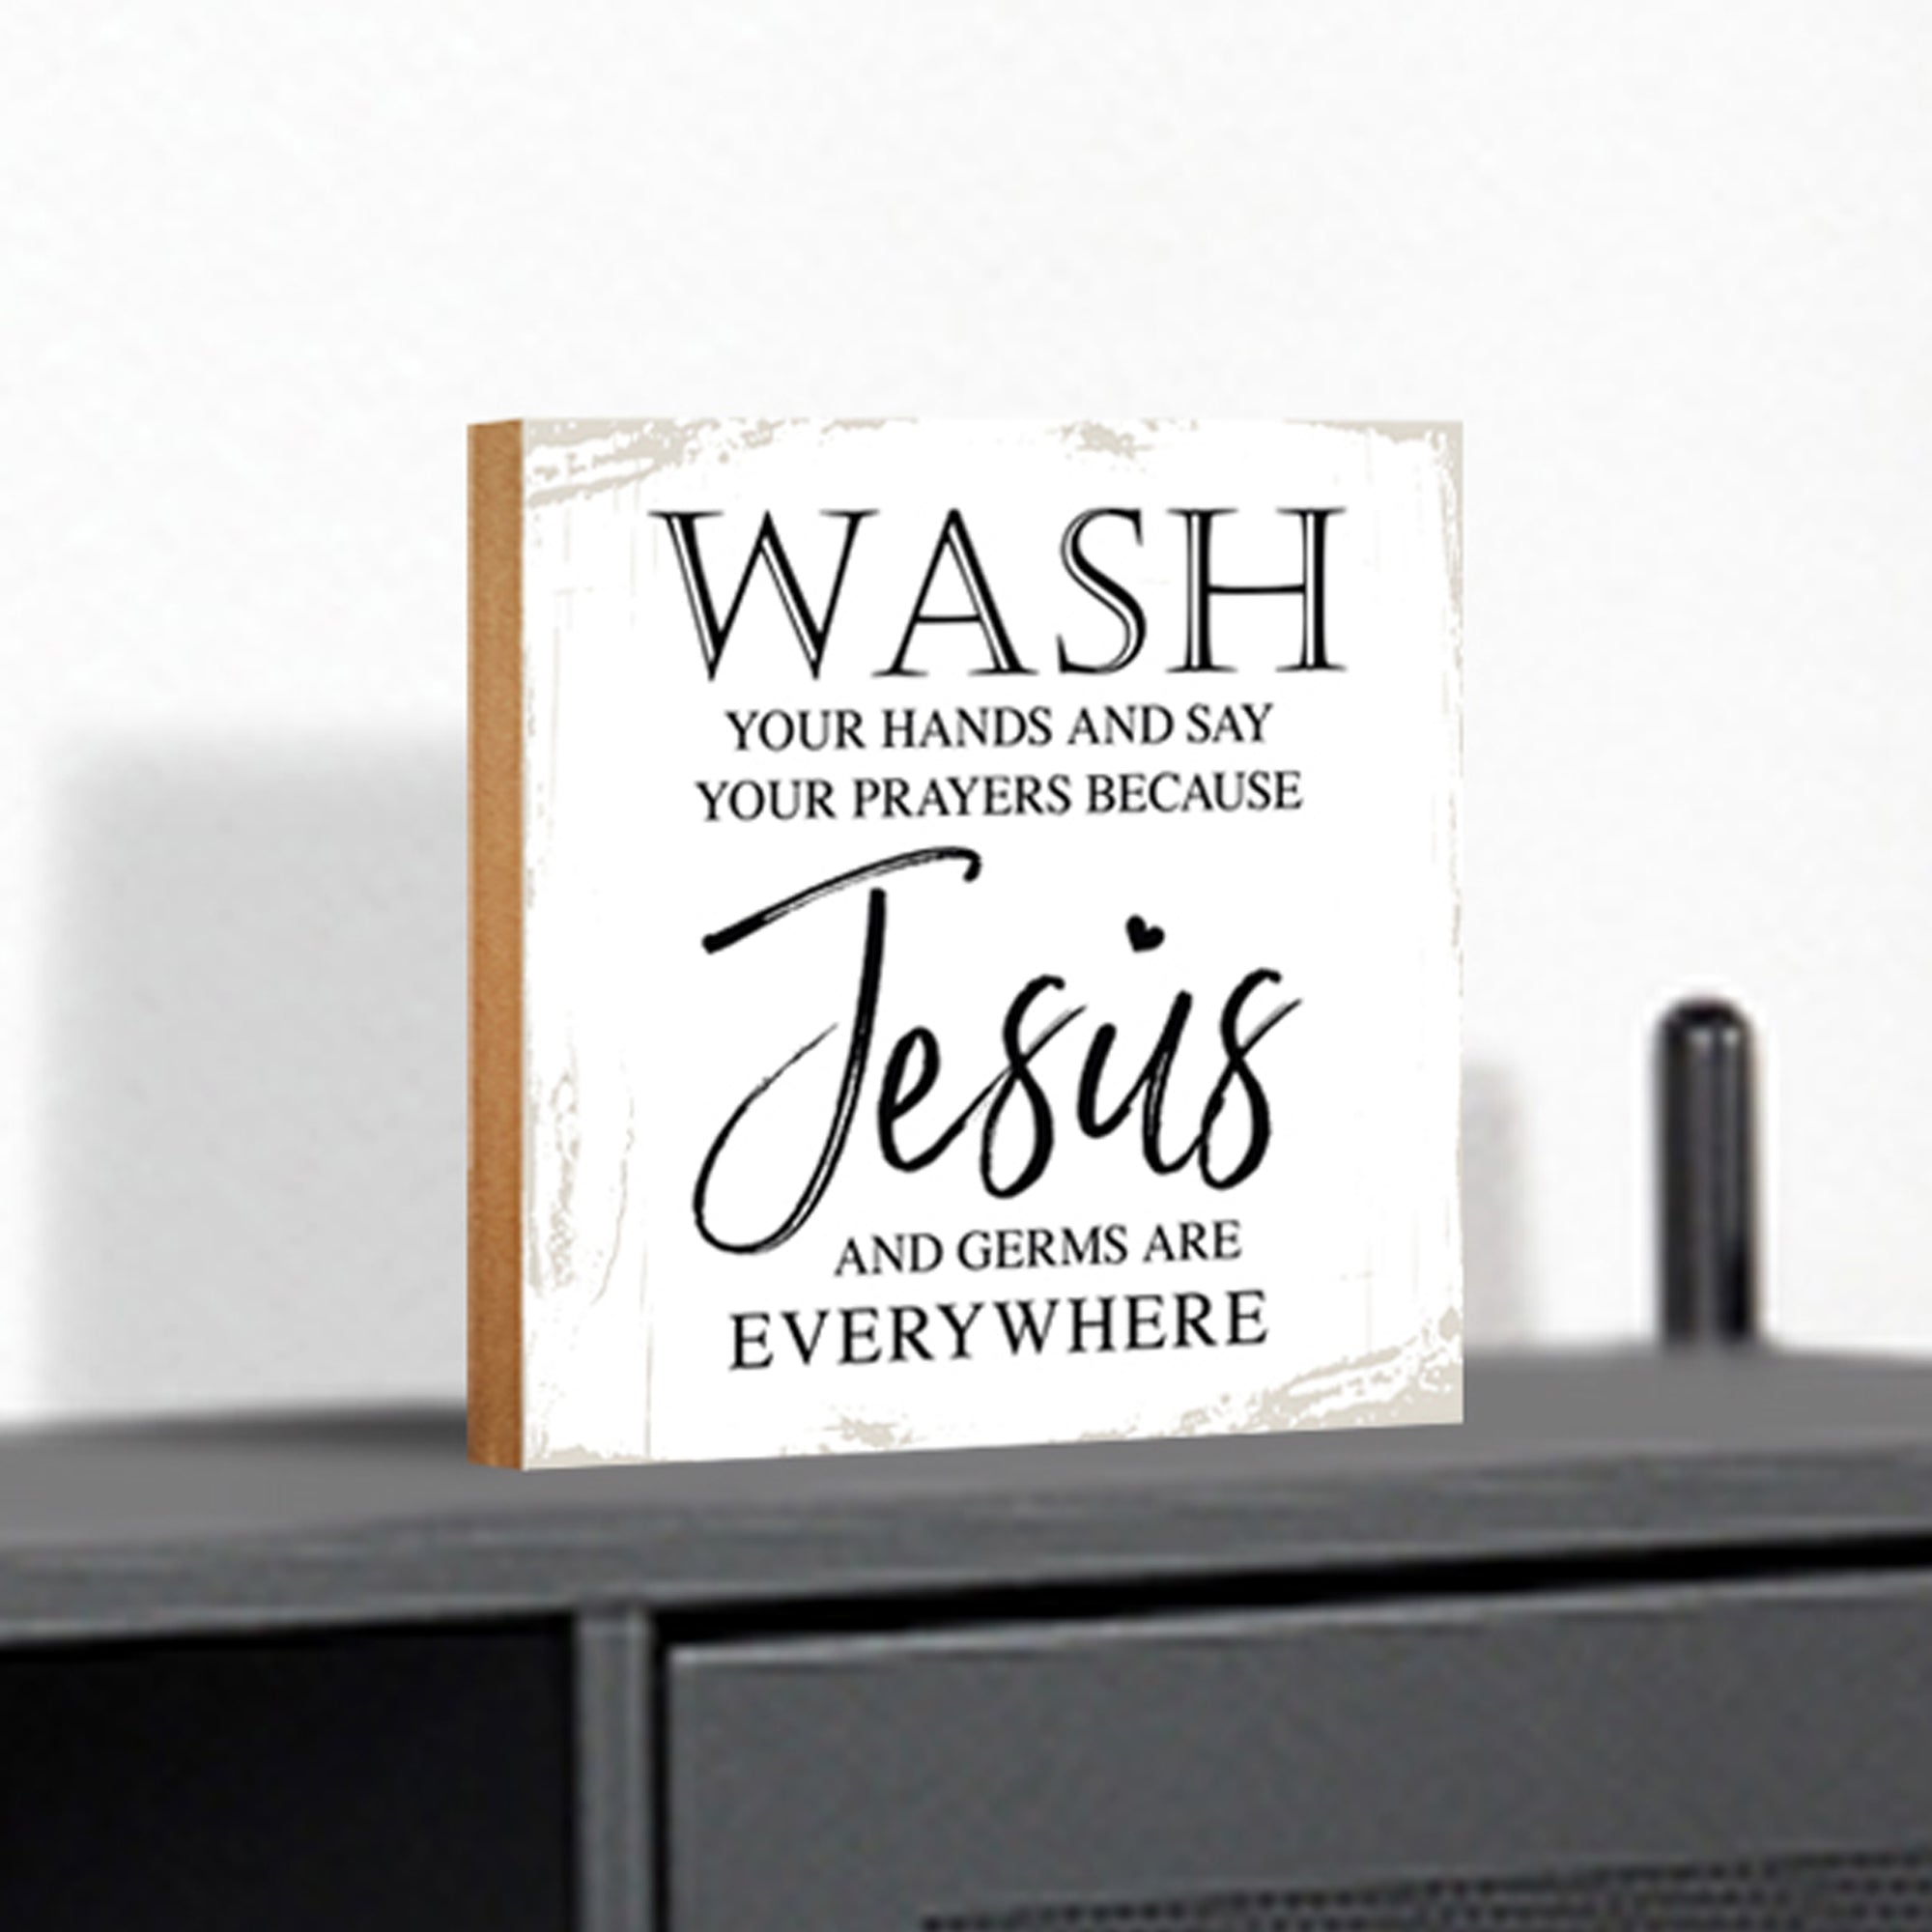 Wooden BATHROOM 6x6 Block shelf decor (Wash Your Hands Jesus) Inspirational Plaque Tabletop and Family Home Decoration